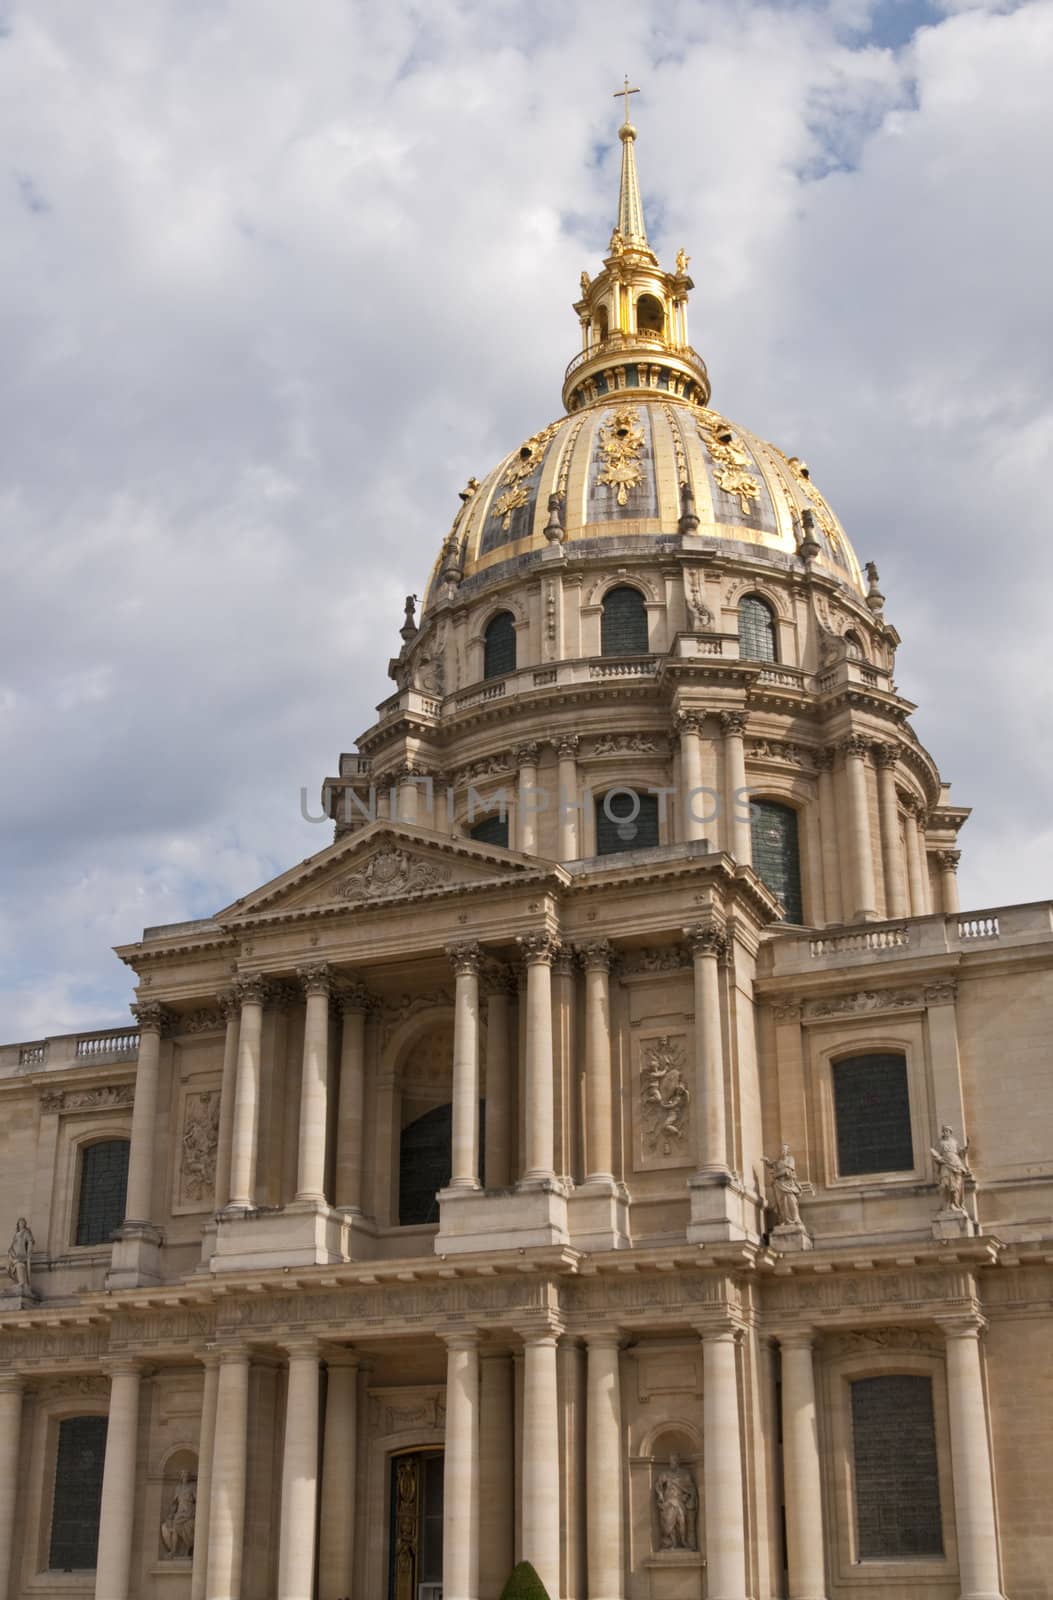 Entrance to the historic Dome Church at Les Invalides in Paris, France.